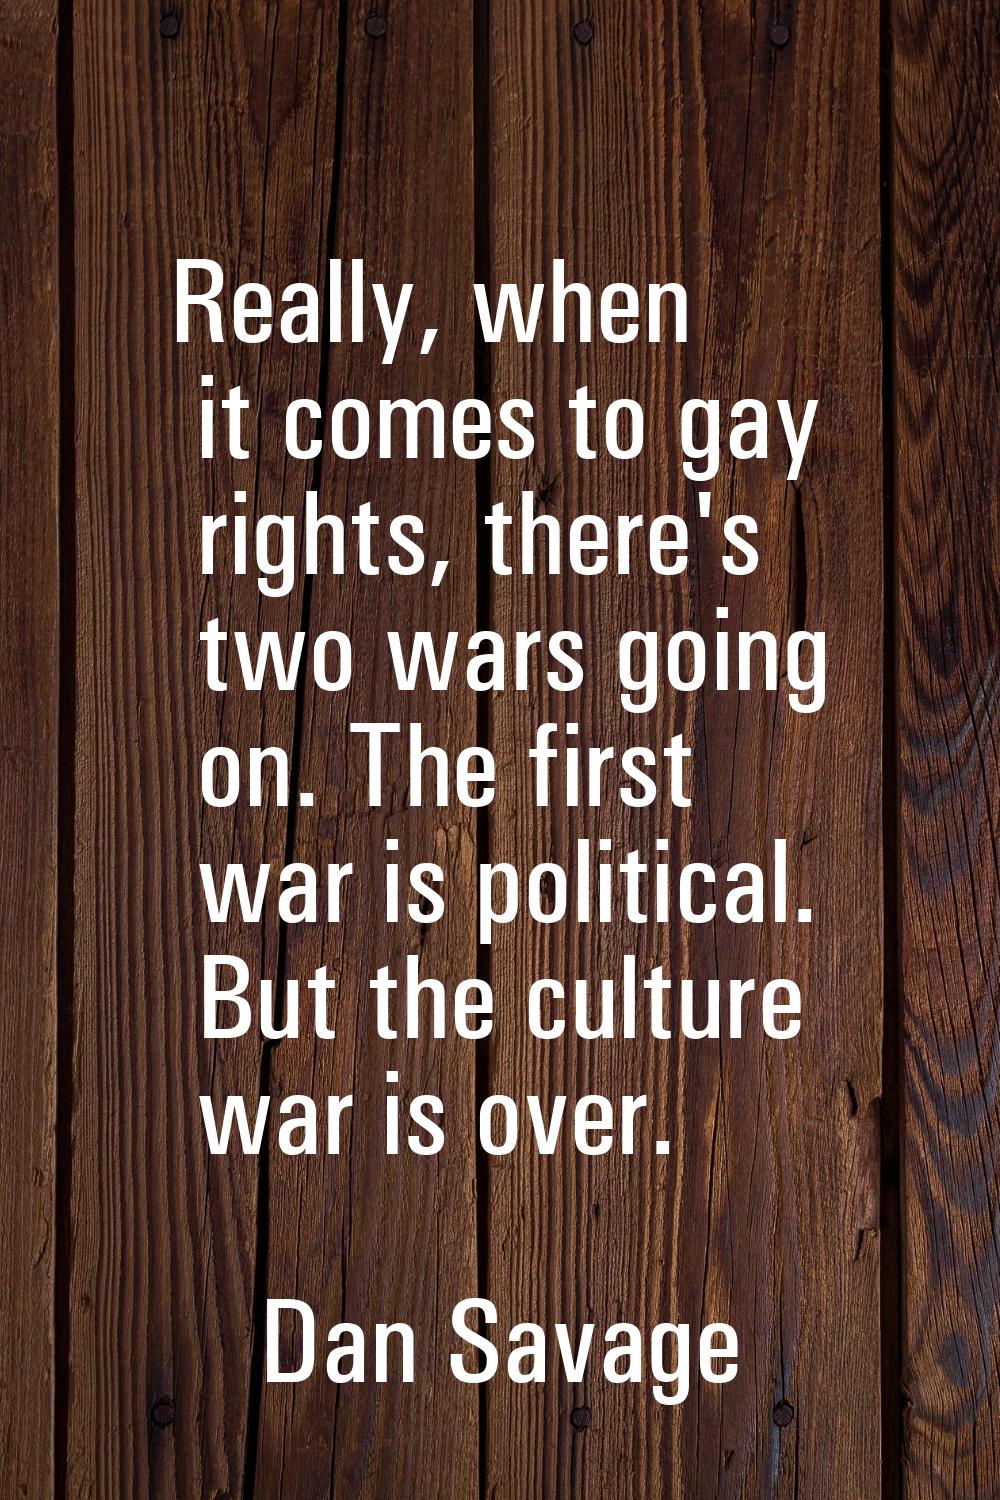 Really, when it comes to gay rights, there's two wars going on. The first war is political. But the